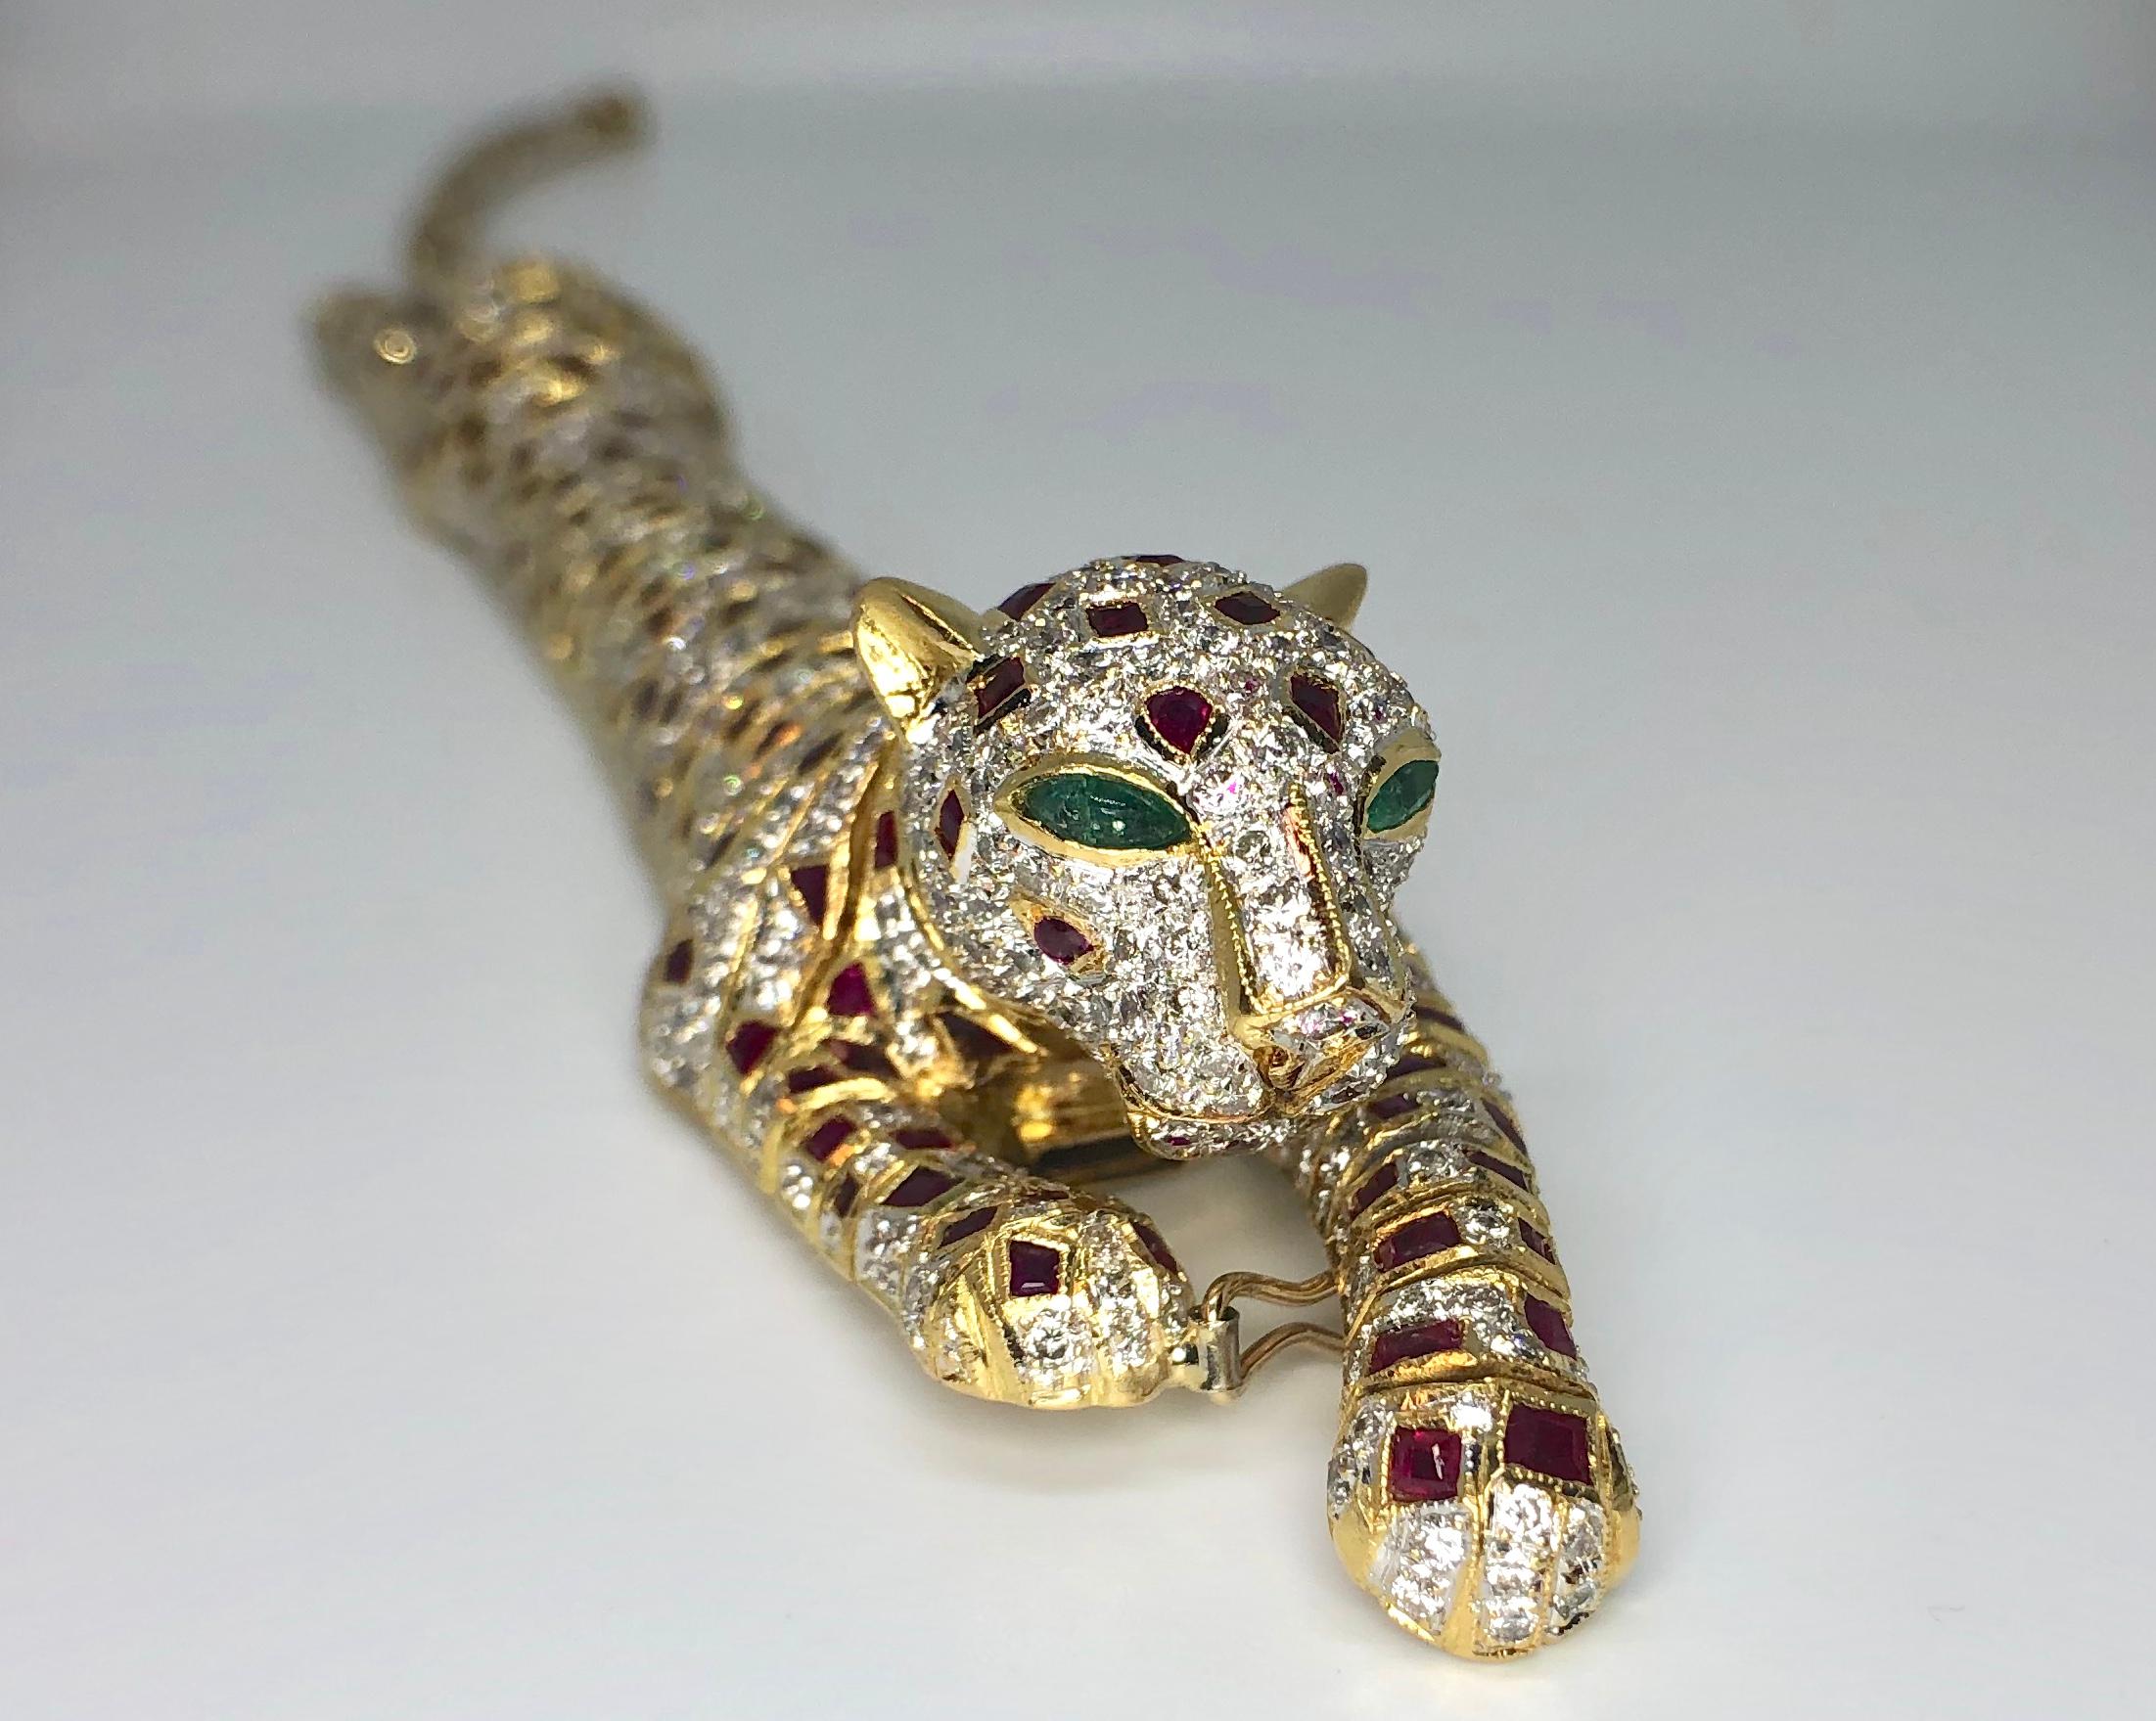 Lady's 18 Karat Yellow Gold Diamond, Ruby and Emerald Panther Bracelet / Brooch. This custom-made panther is jointed along its entire length to allow the bracelet to drape around the wrist. It can also be worn as a brooch for an impressive accent to